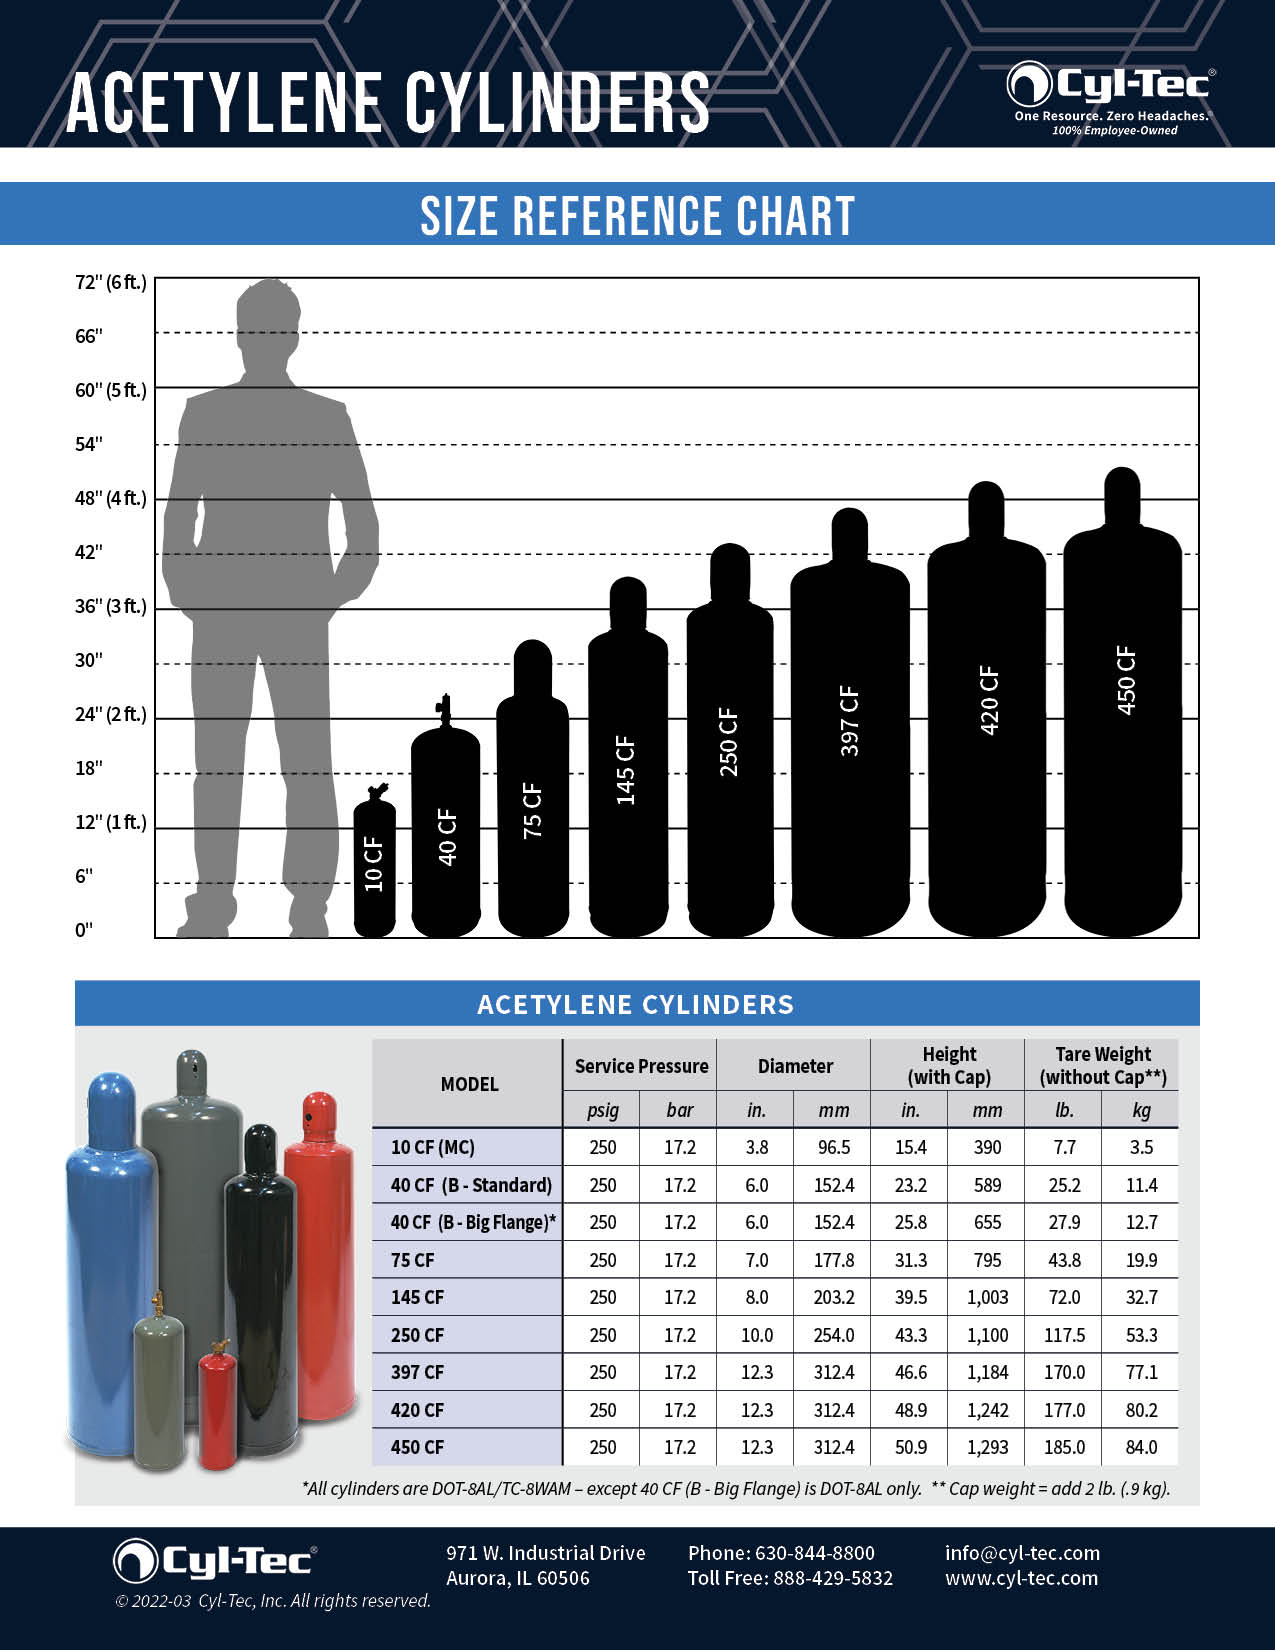 CylTec Gas Cylinder Size Chart Acetylene